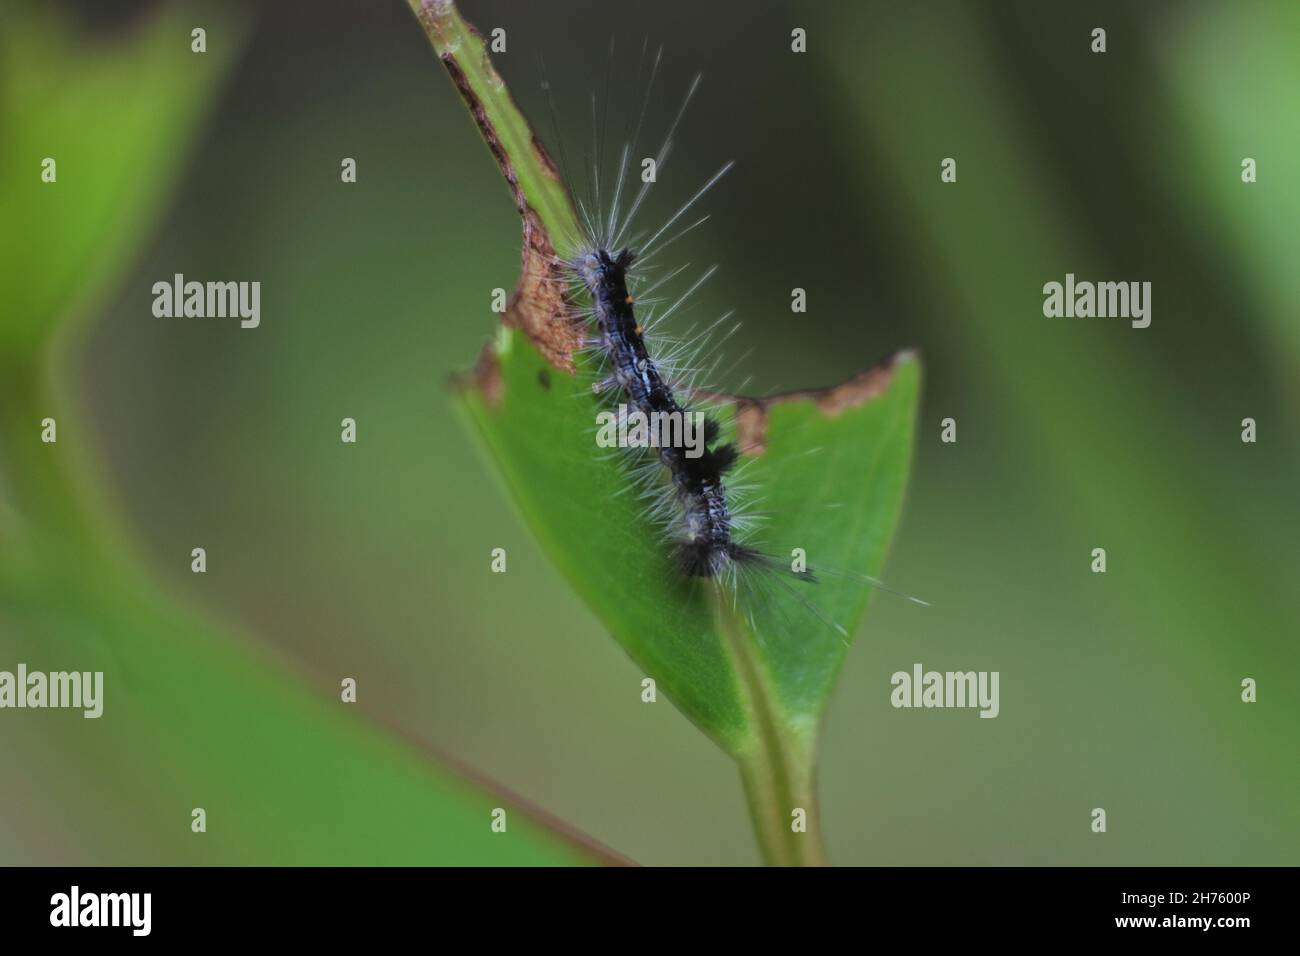 Close-up shot of a Larch tussock moth eating green leaf of a plant Stock Photo